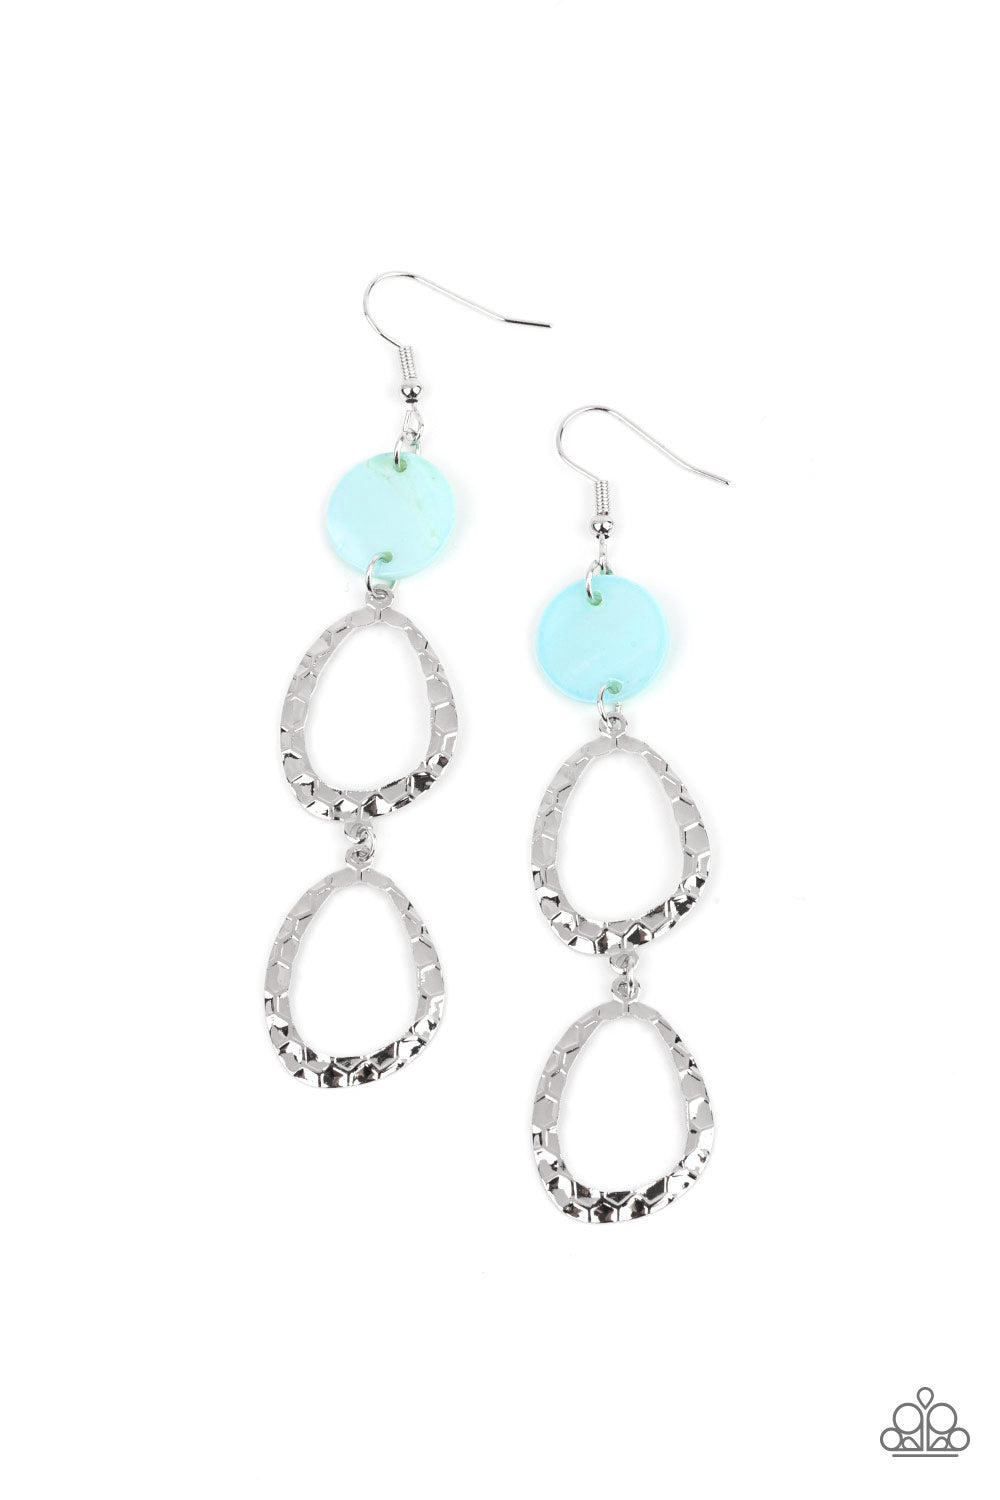 Paparazzi Surfside Shimmer Blue Earring. #P5WH-BLXX-216XX. Subscribe & Save. $5 Blue Jewelry